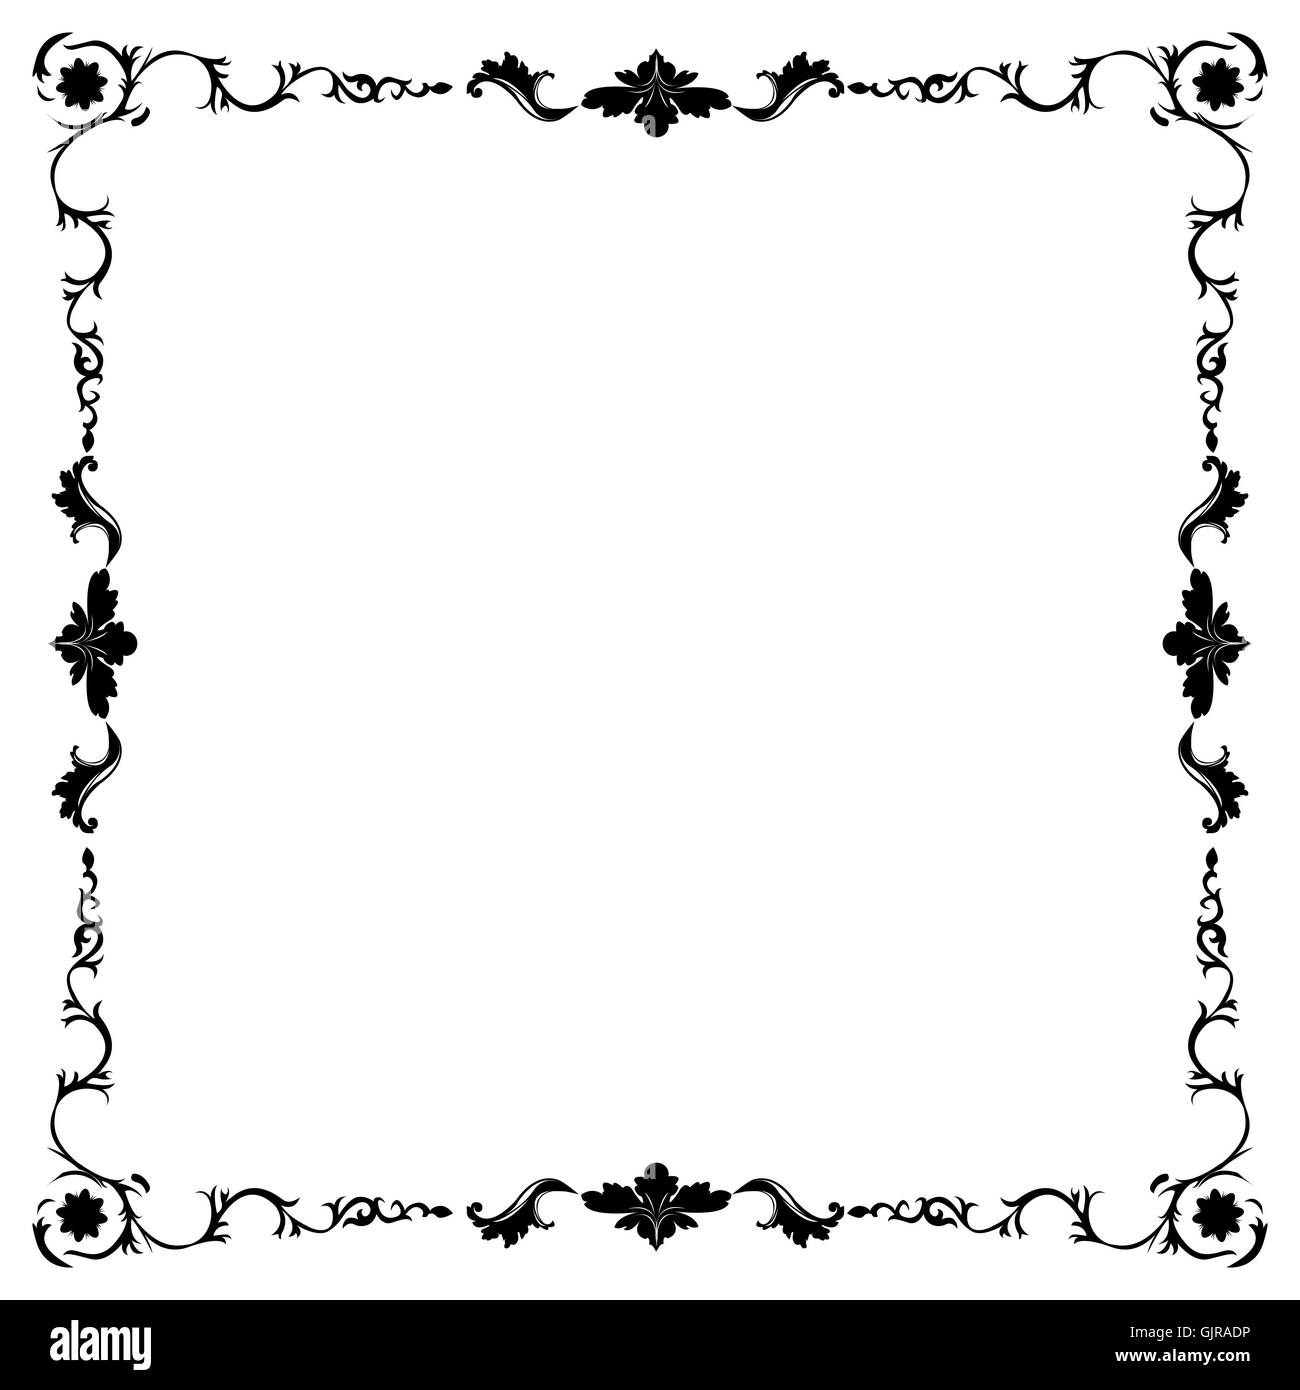 Frame in black and white Stock Photo